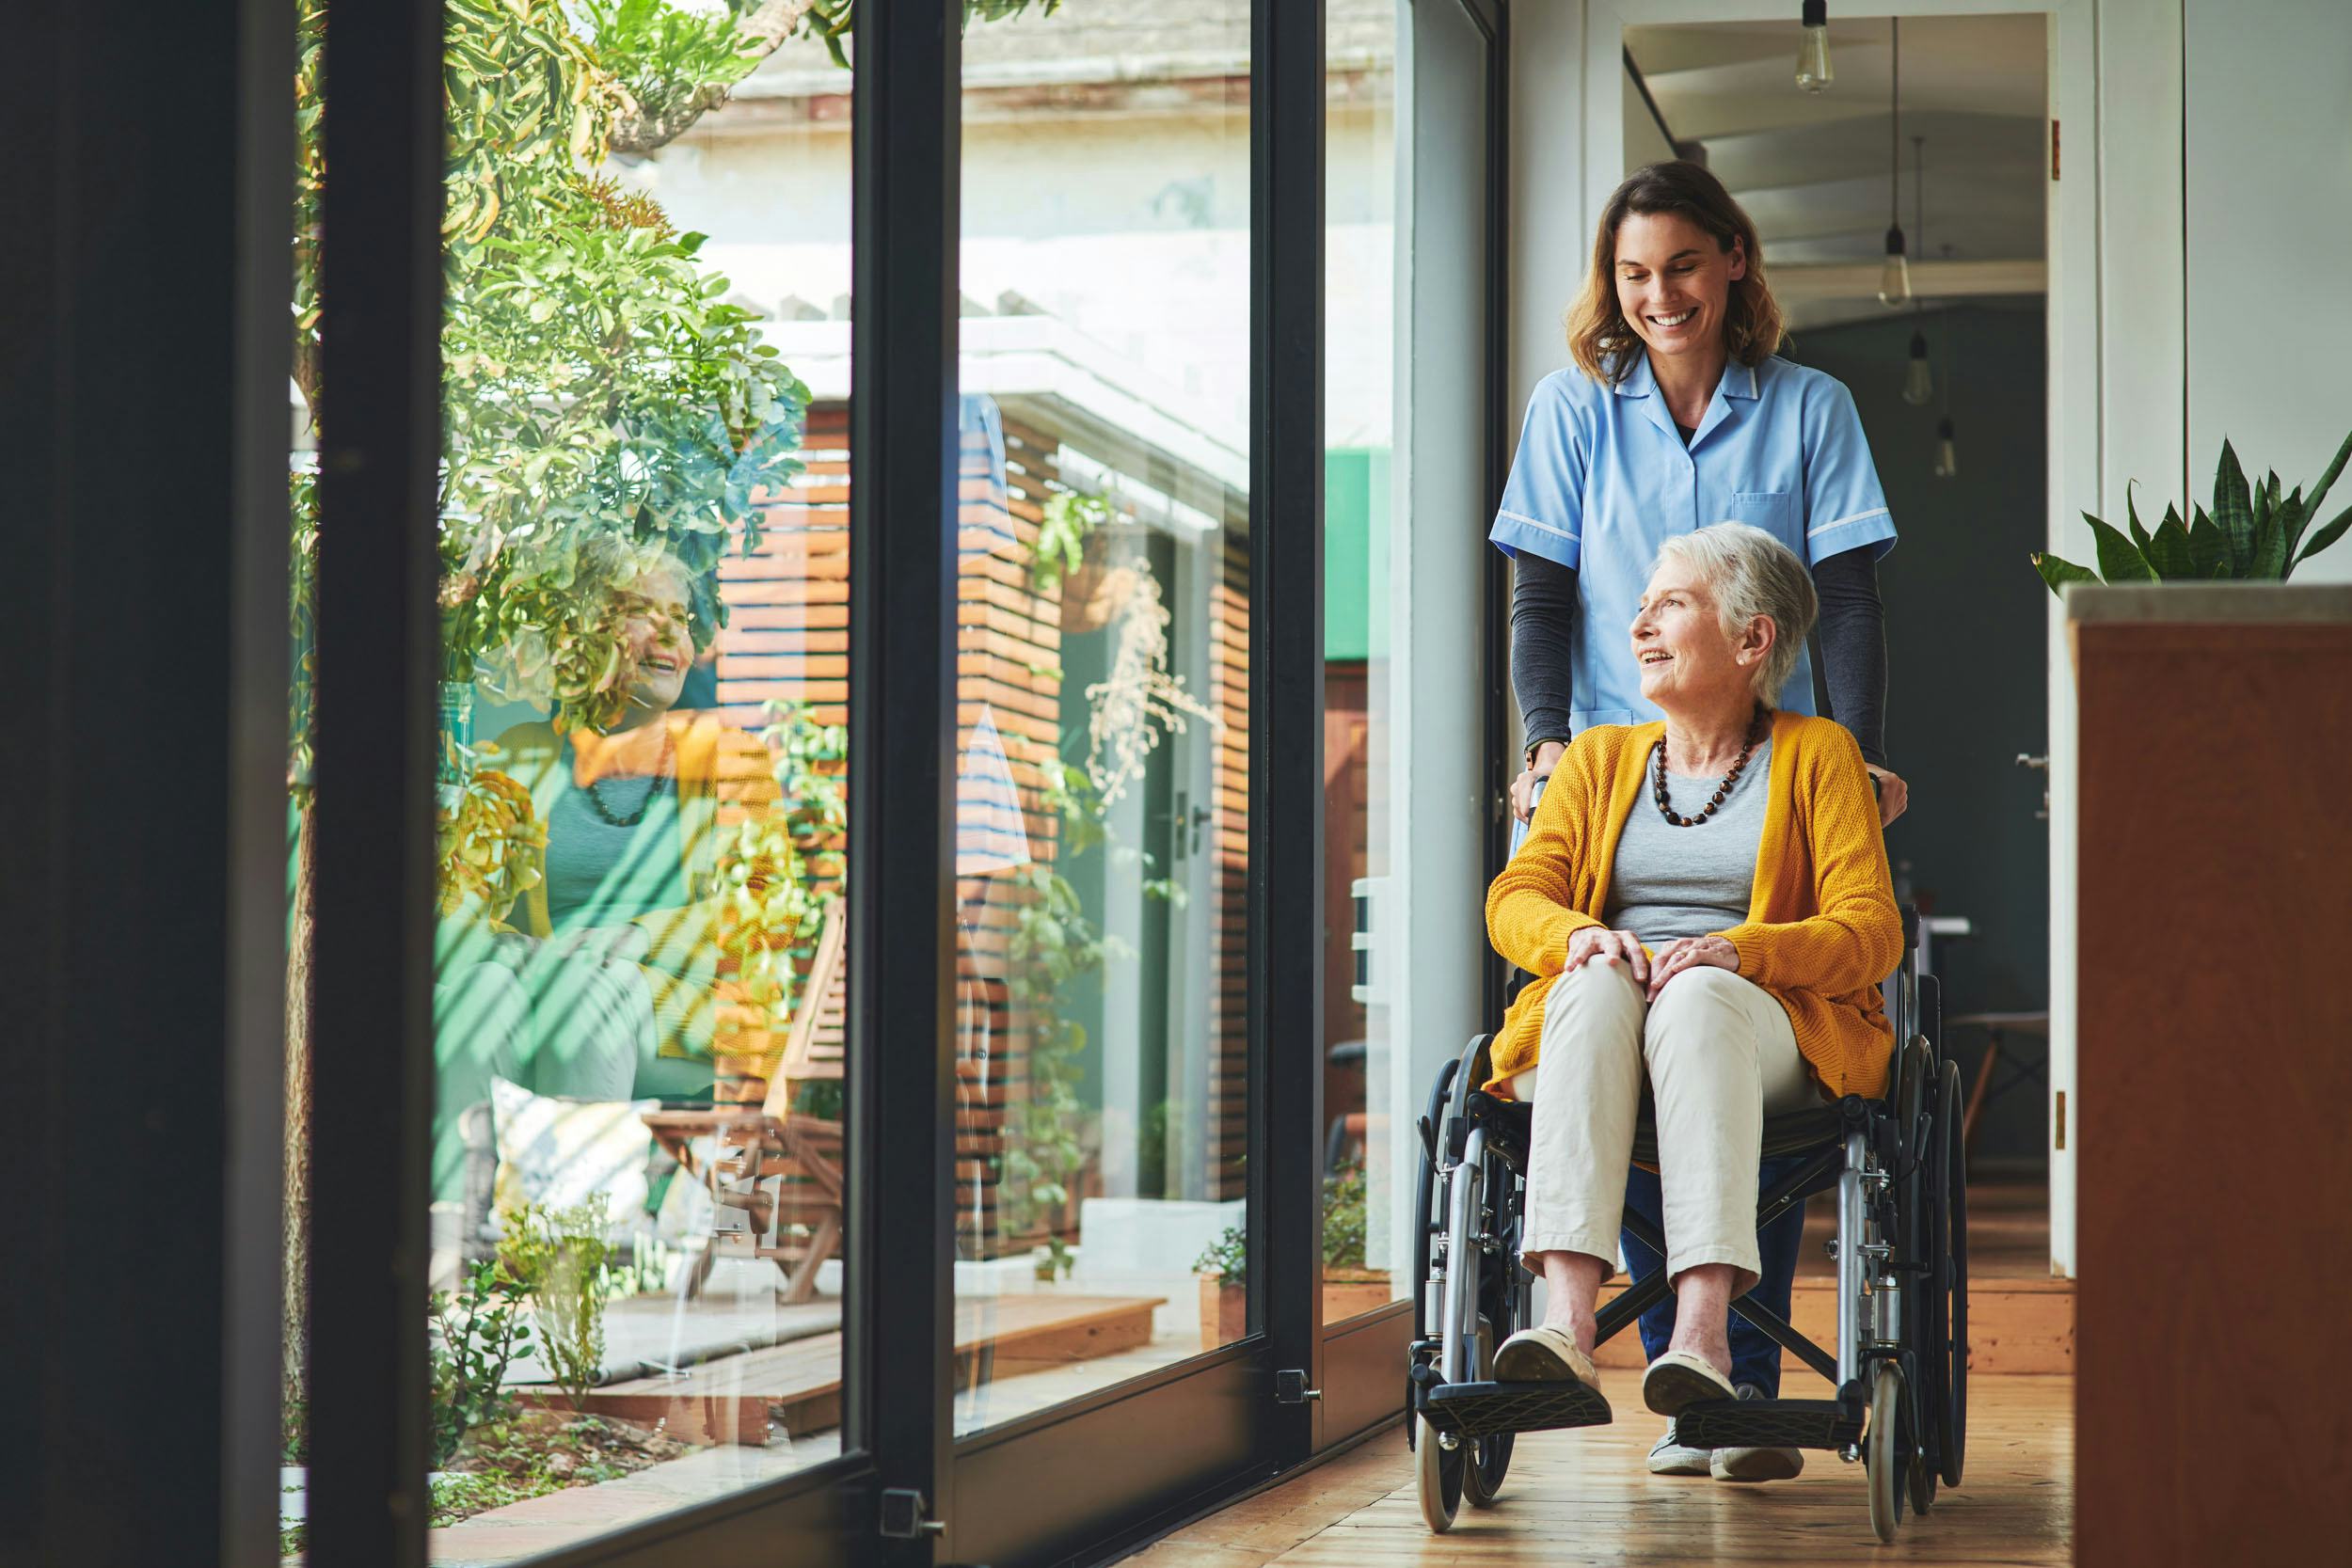 Aged care facility shows a nurse and elderly